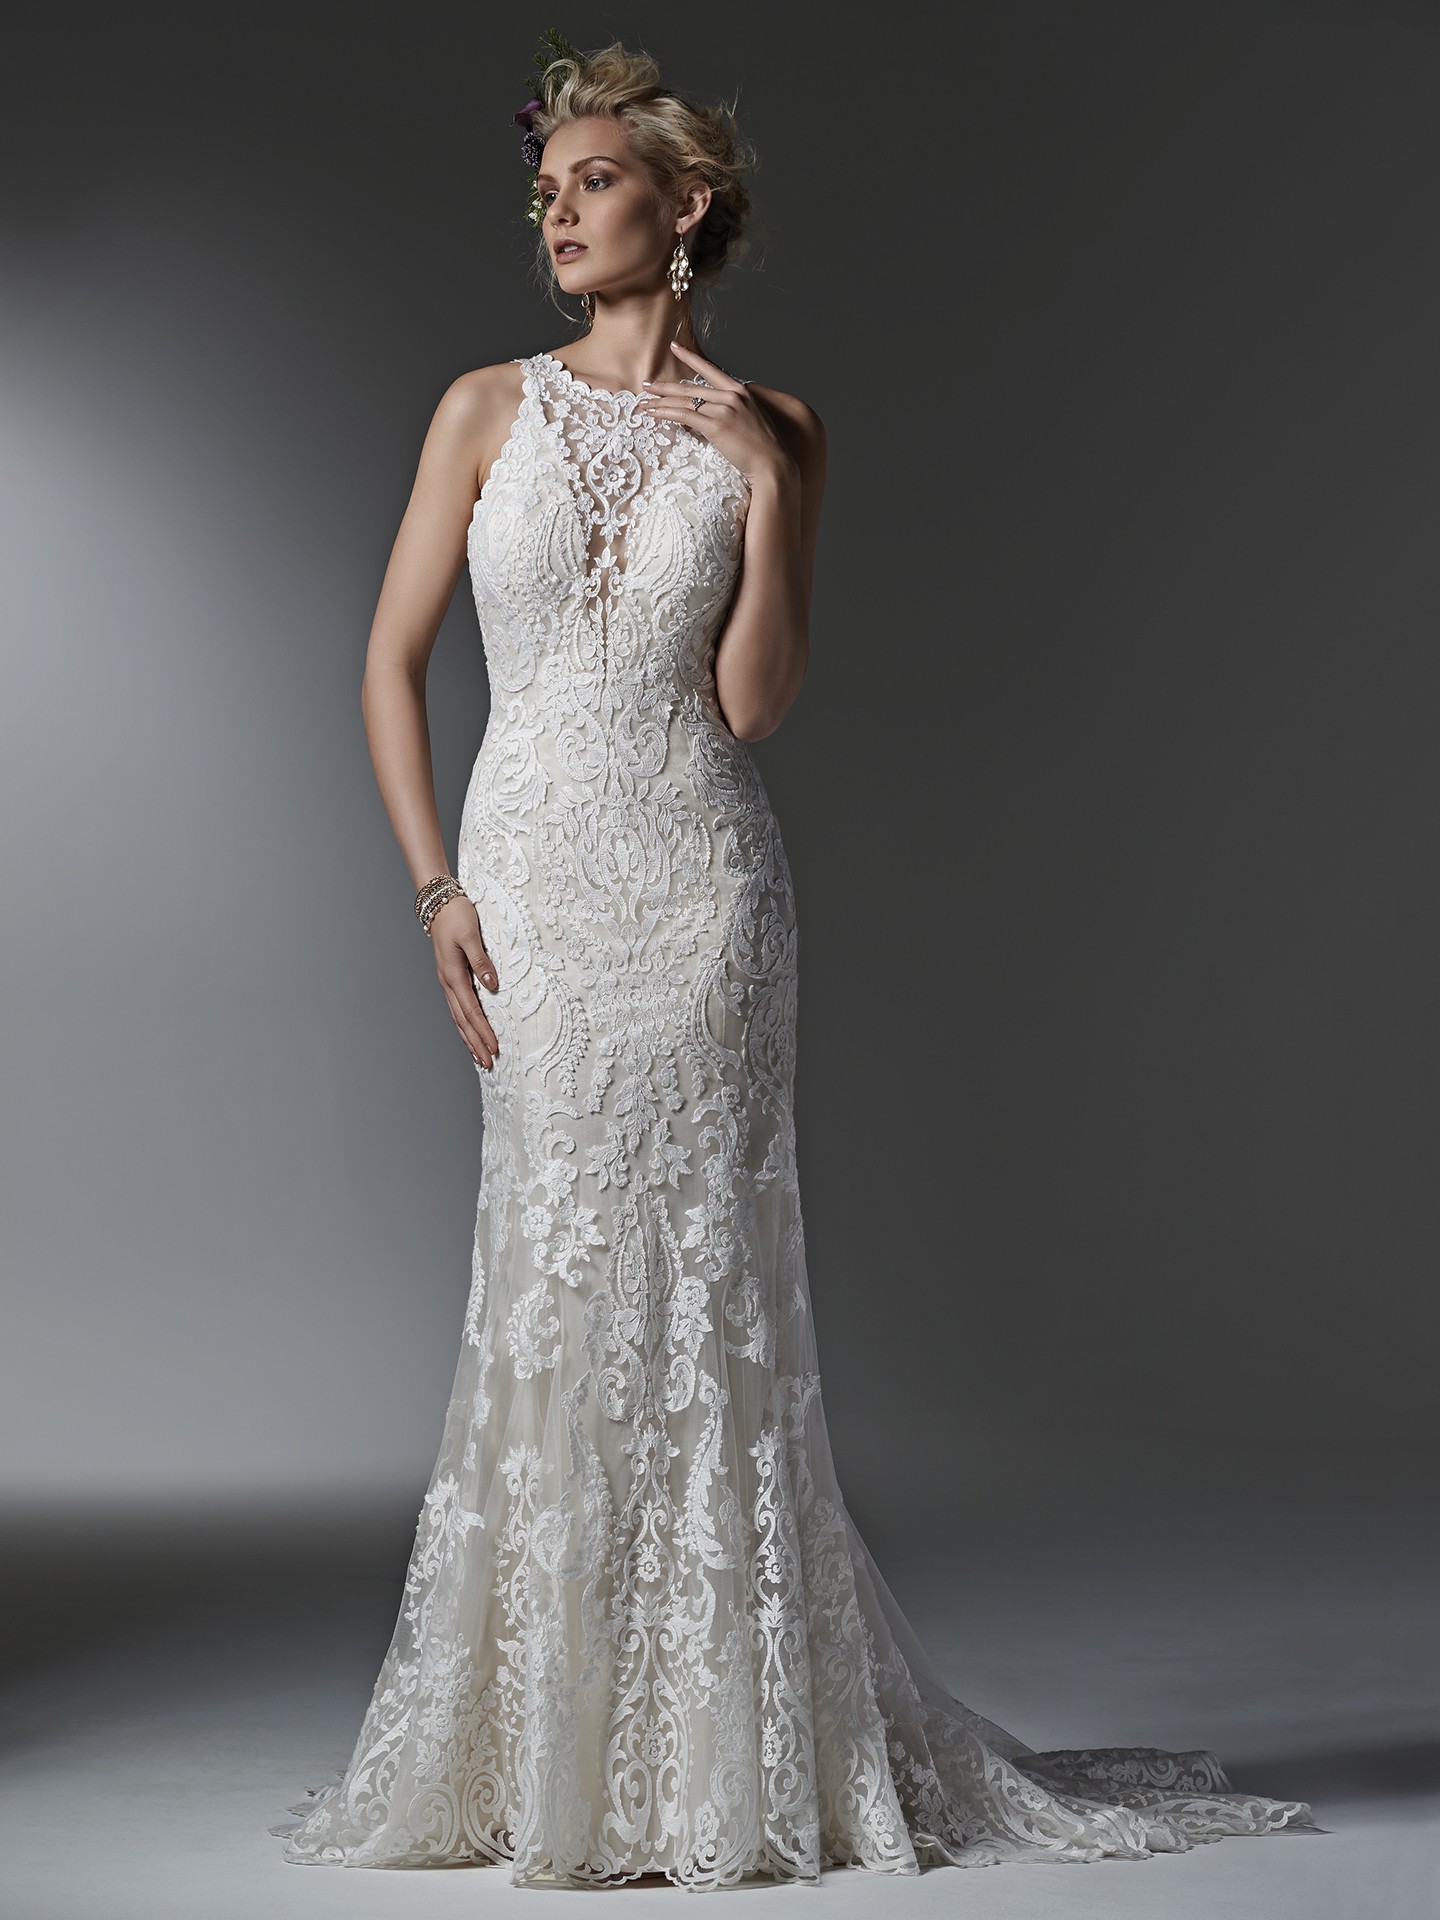 Venetian-style Lace and Scalloped Trim Winifred by Sottero and Midgley